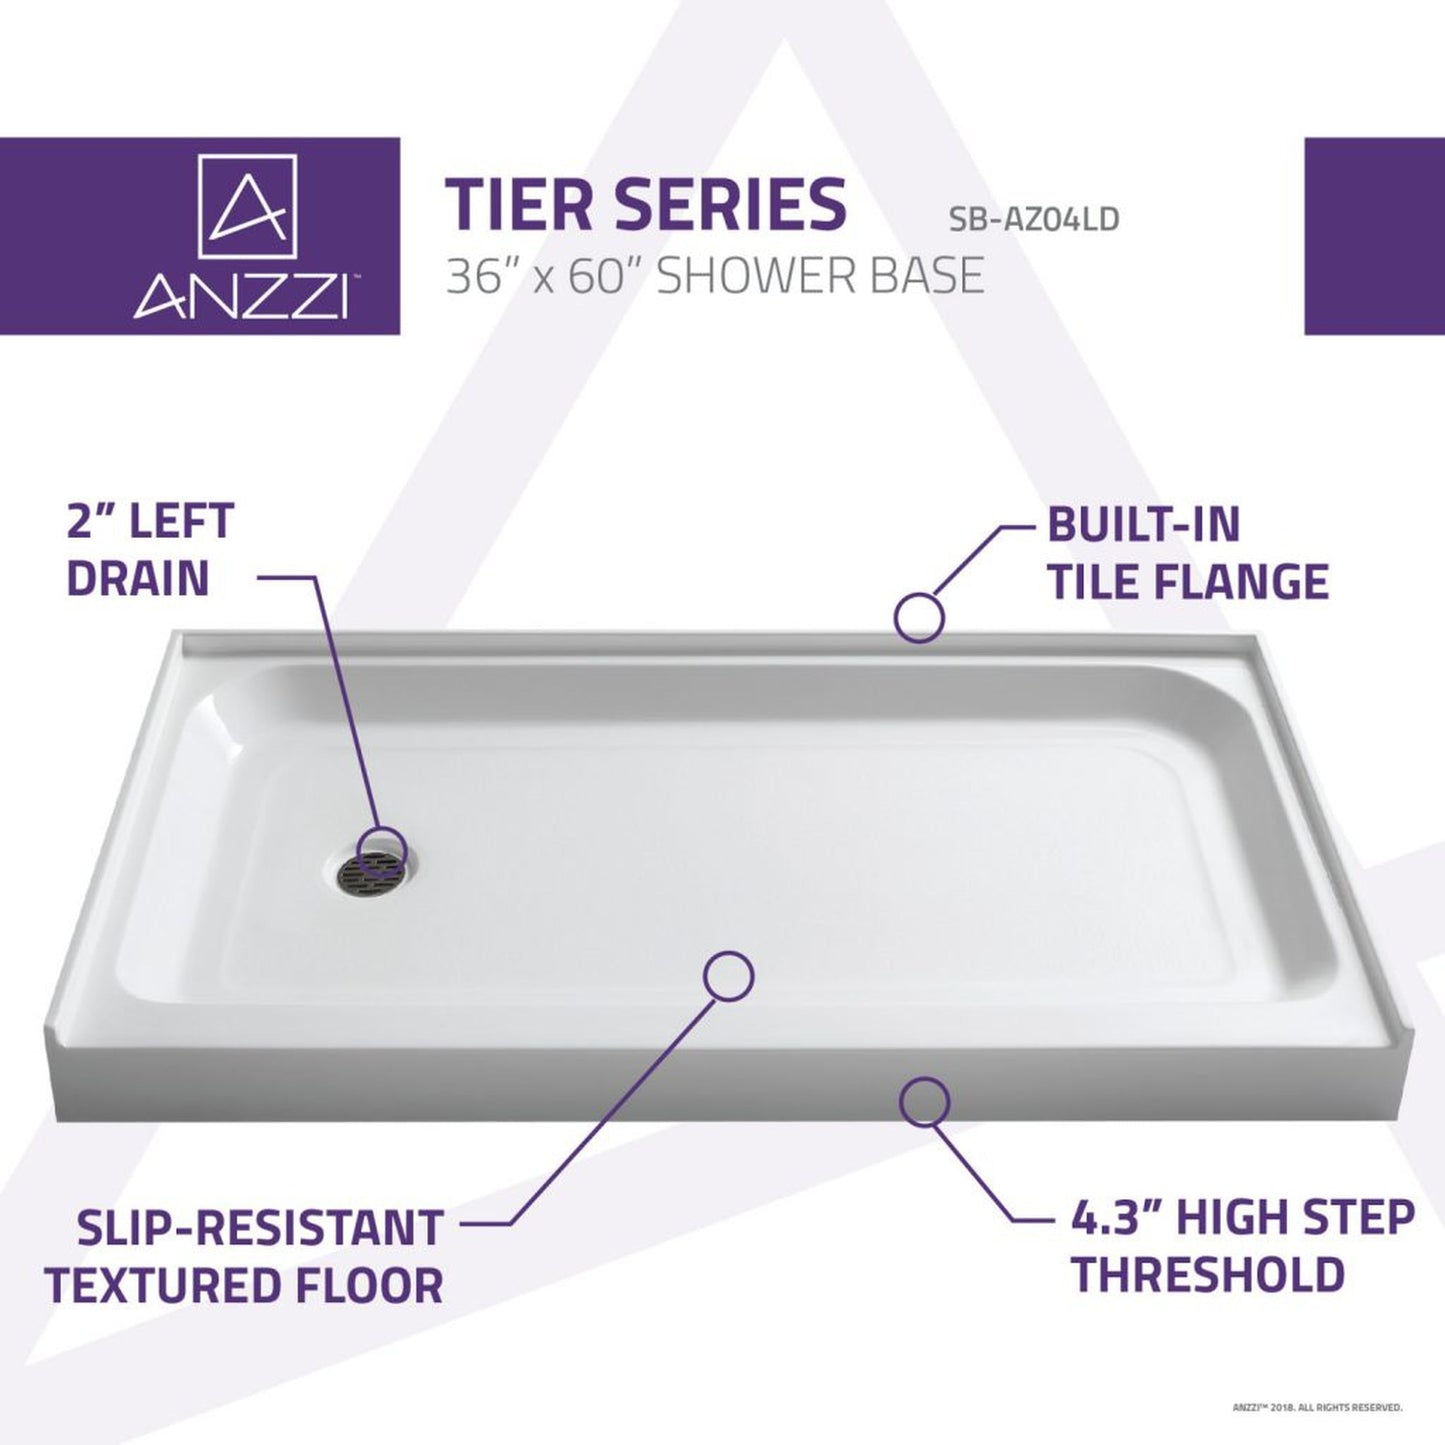 ANZZI Tier Series 36" x 60" Left Drain Single Threshold White Shower Base With Built-in Tile Flange